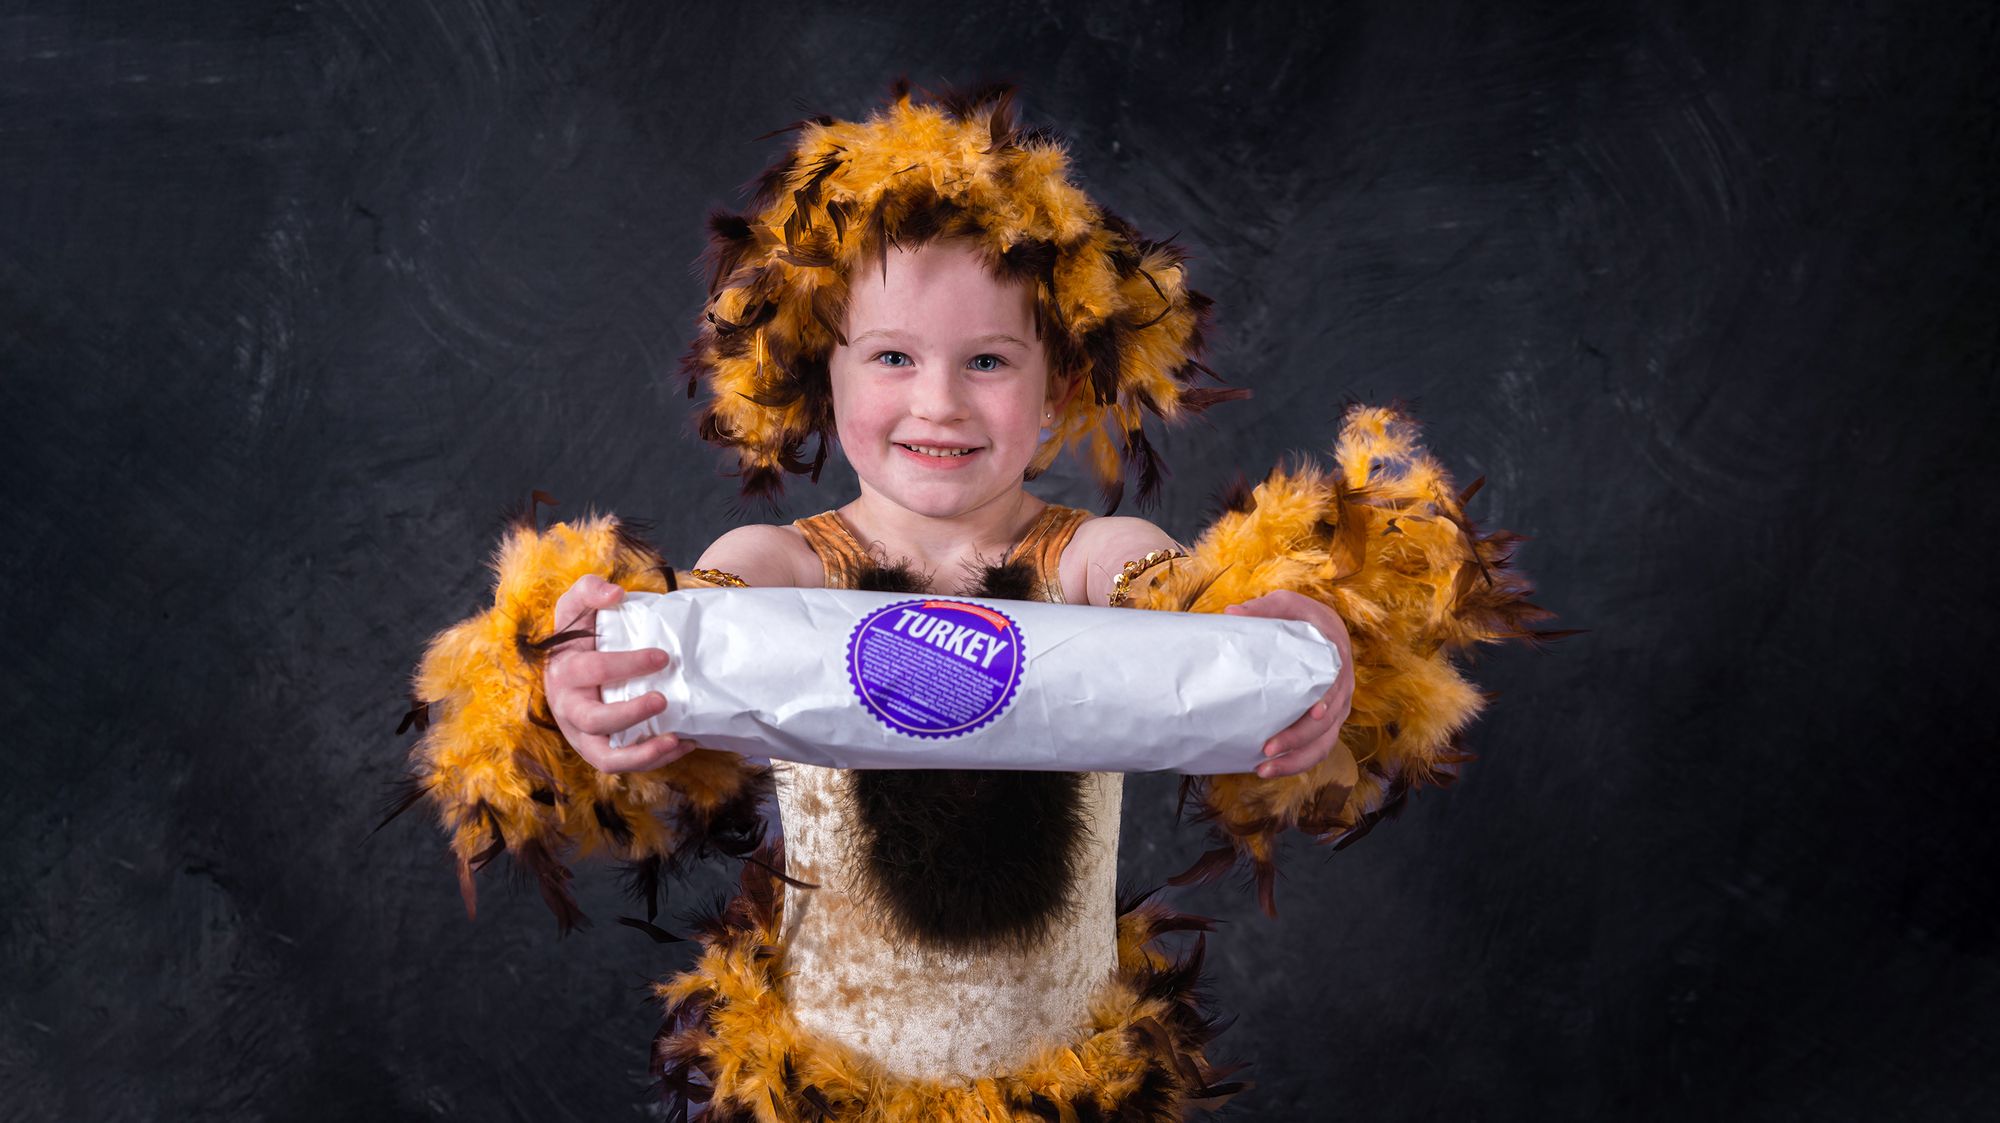 Youth girl dancer in a lion costume holding a Marianna's wrapped hoagie